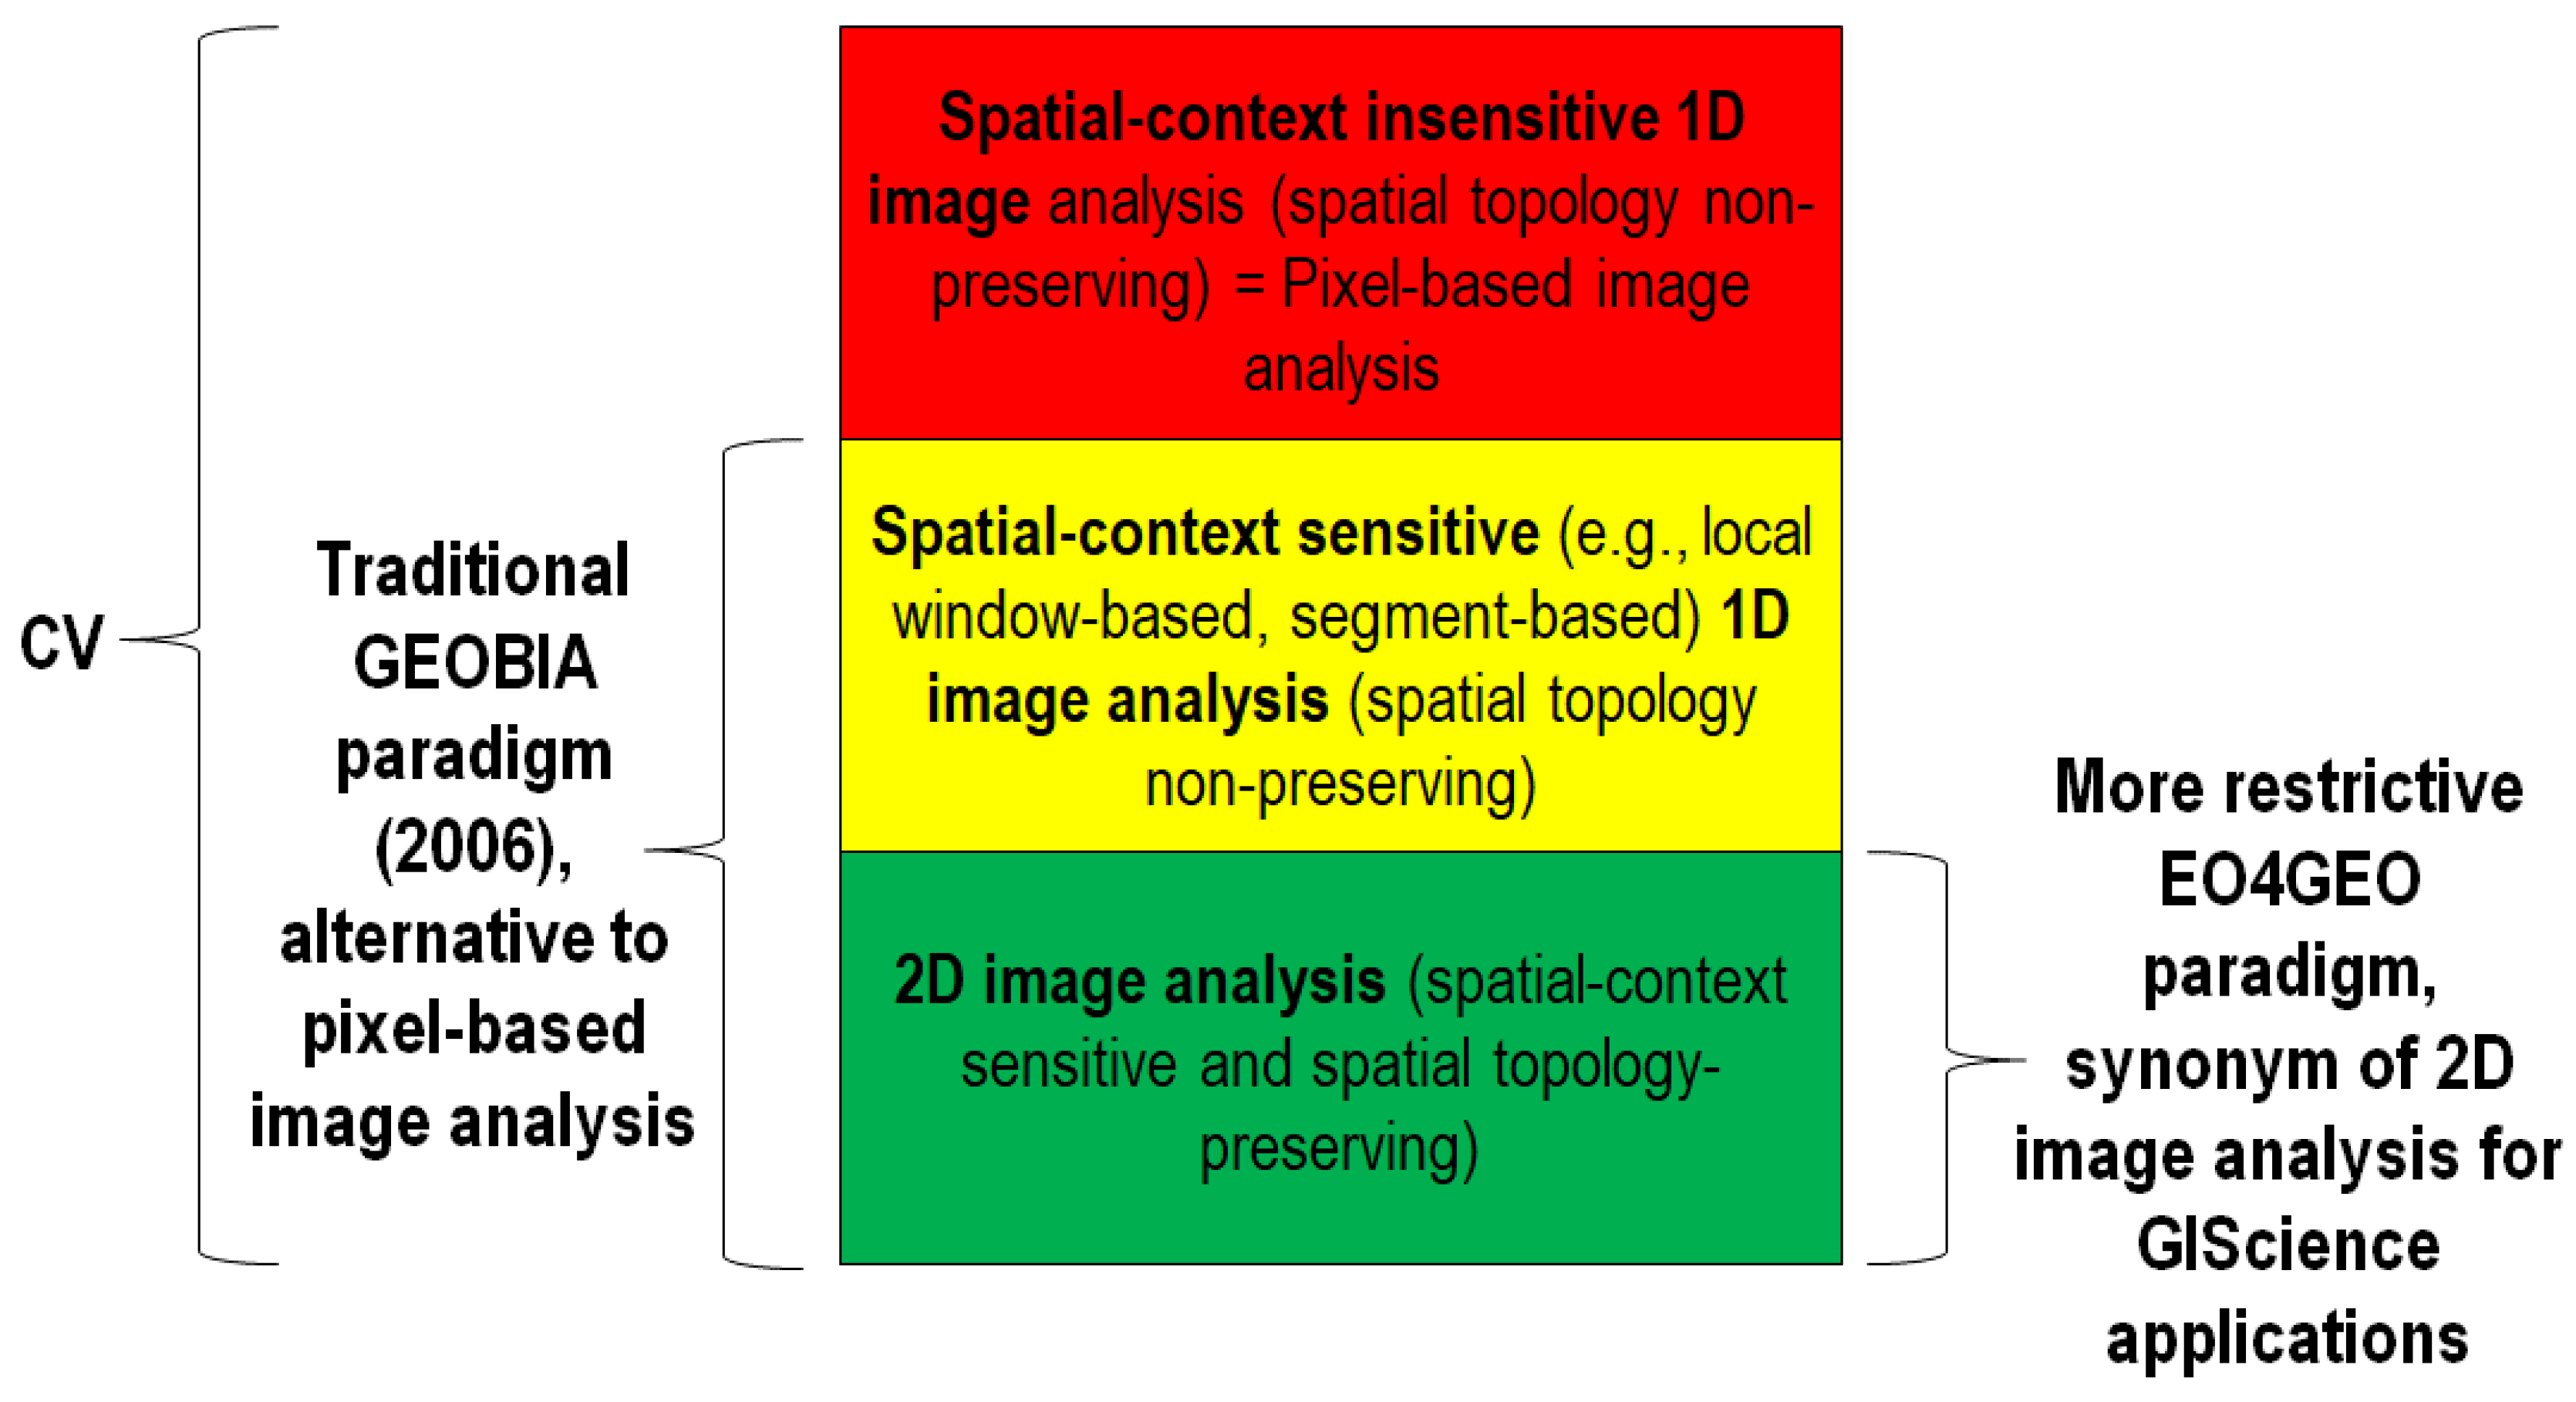 2D image analysis, synonym of spatial topology-preserving